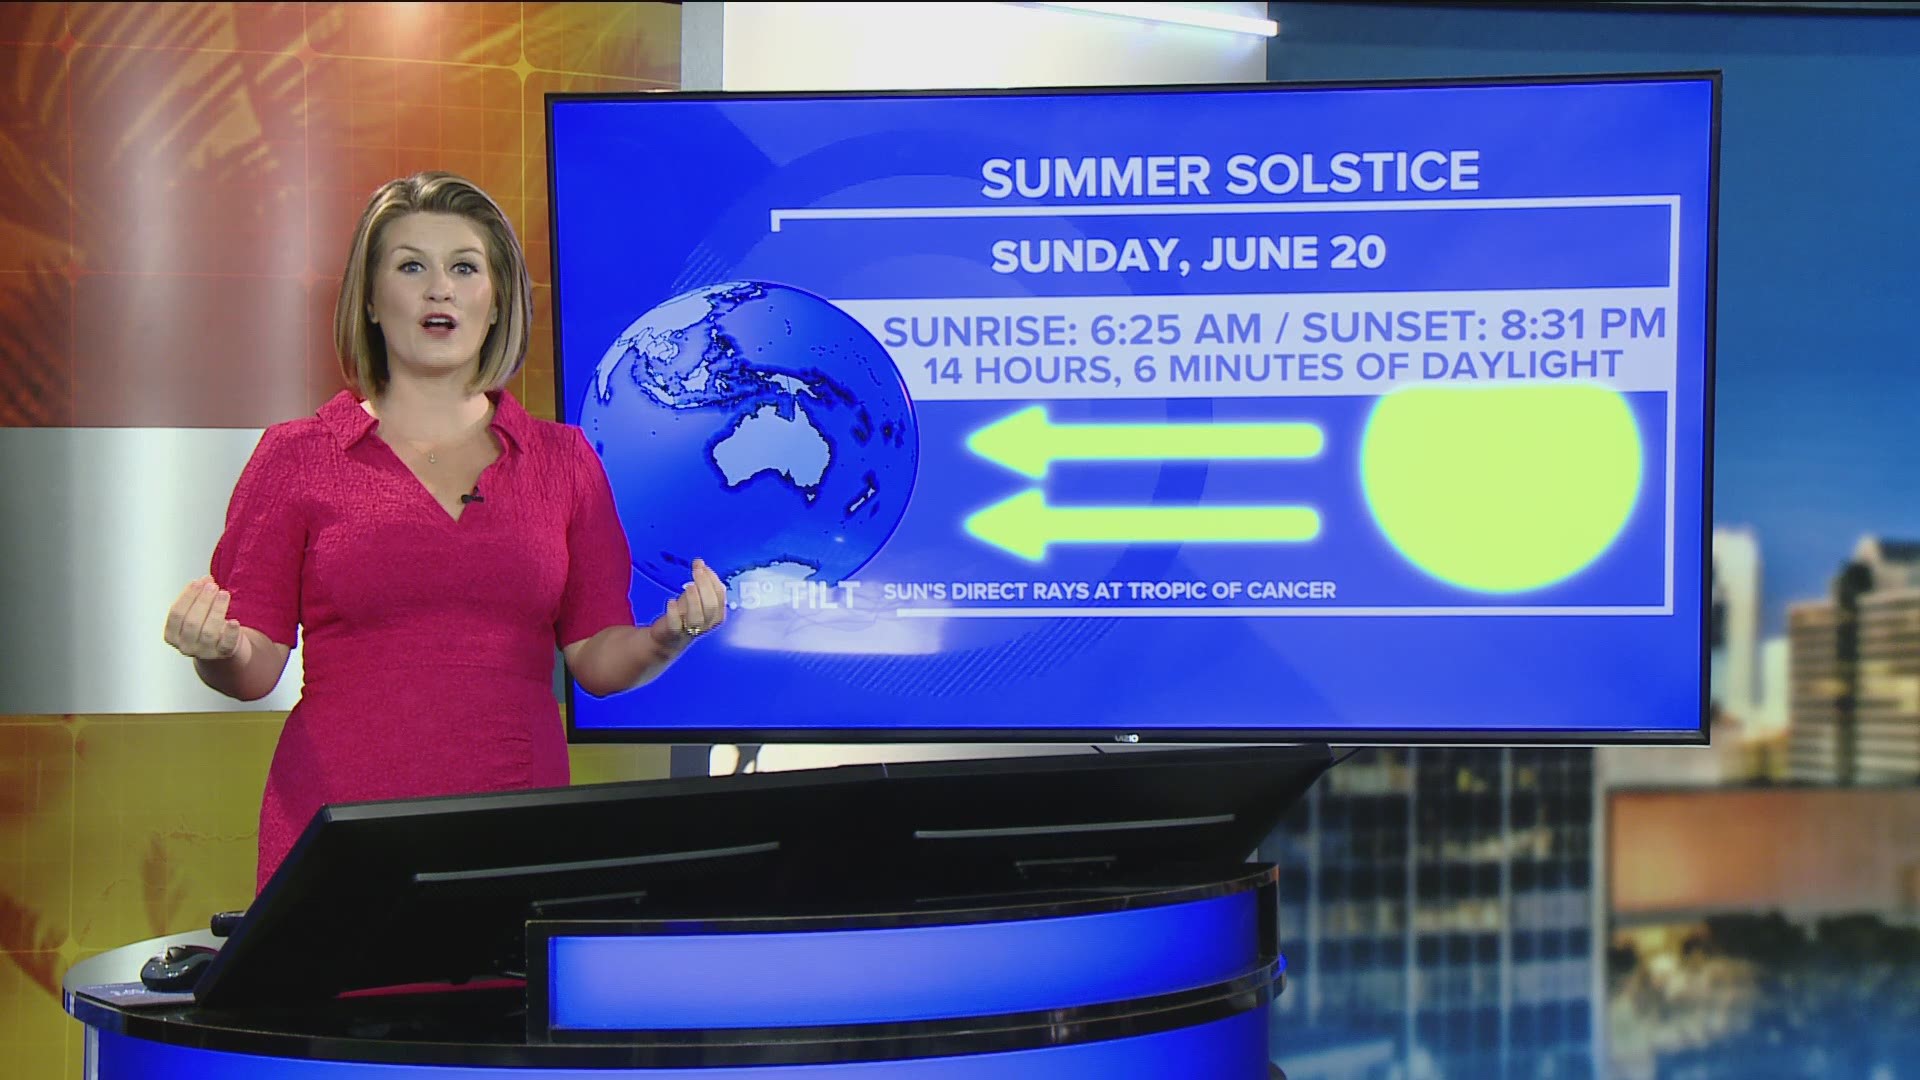 Astronomically, we define seasons with the equinoxes and solstices. The summer solstice marks the longest day of the year!